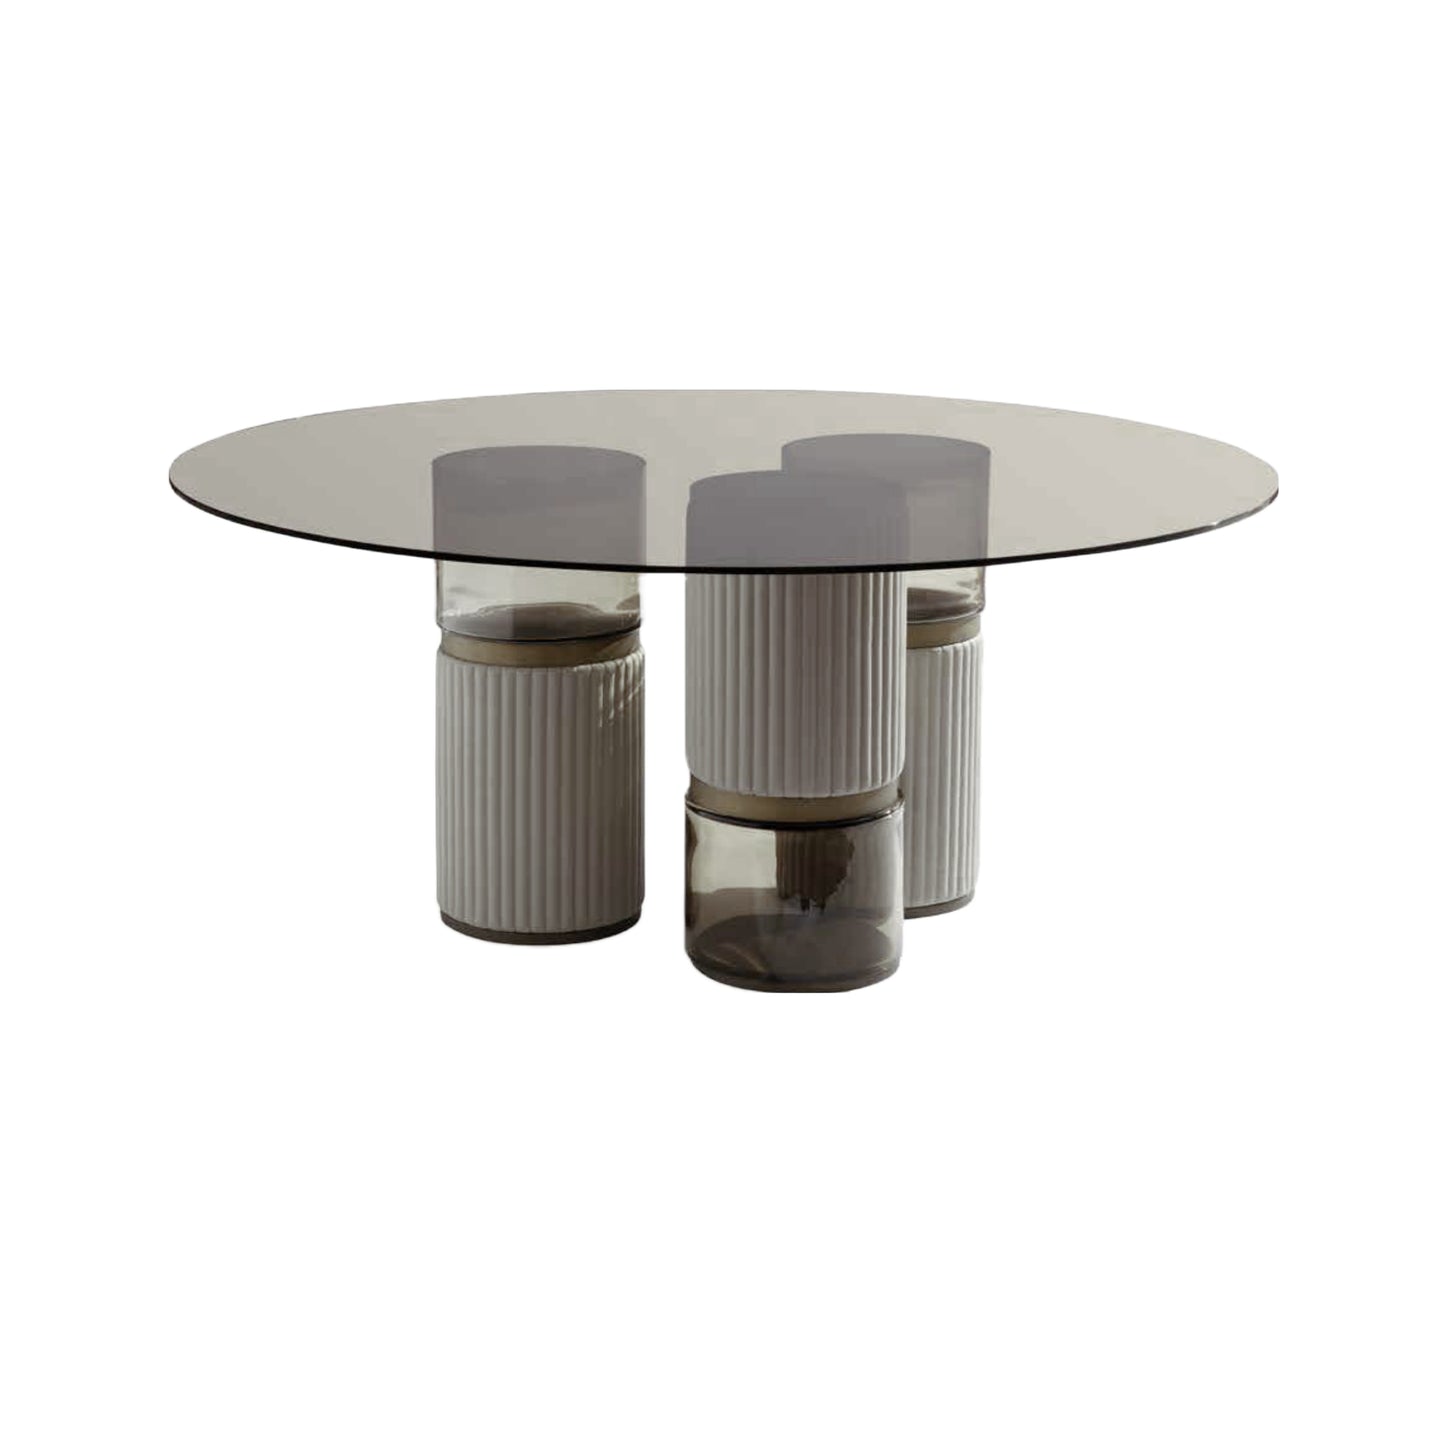 CARPANESE | Imperial R Dining Table - $28,500.00